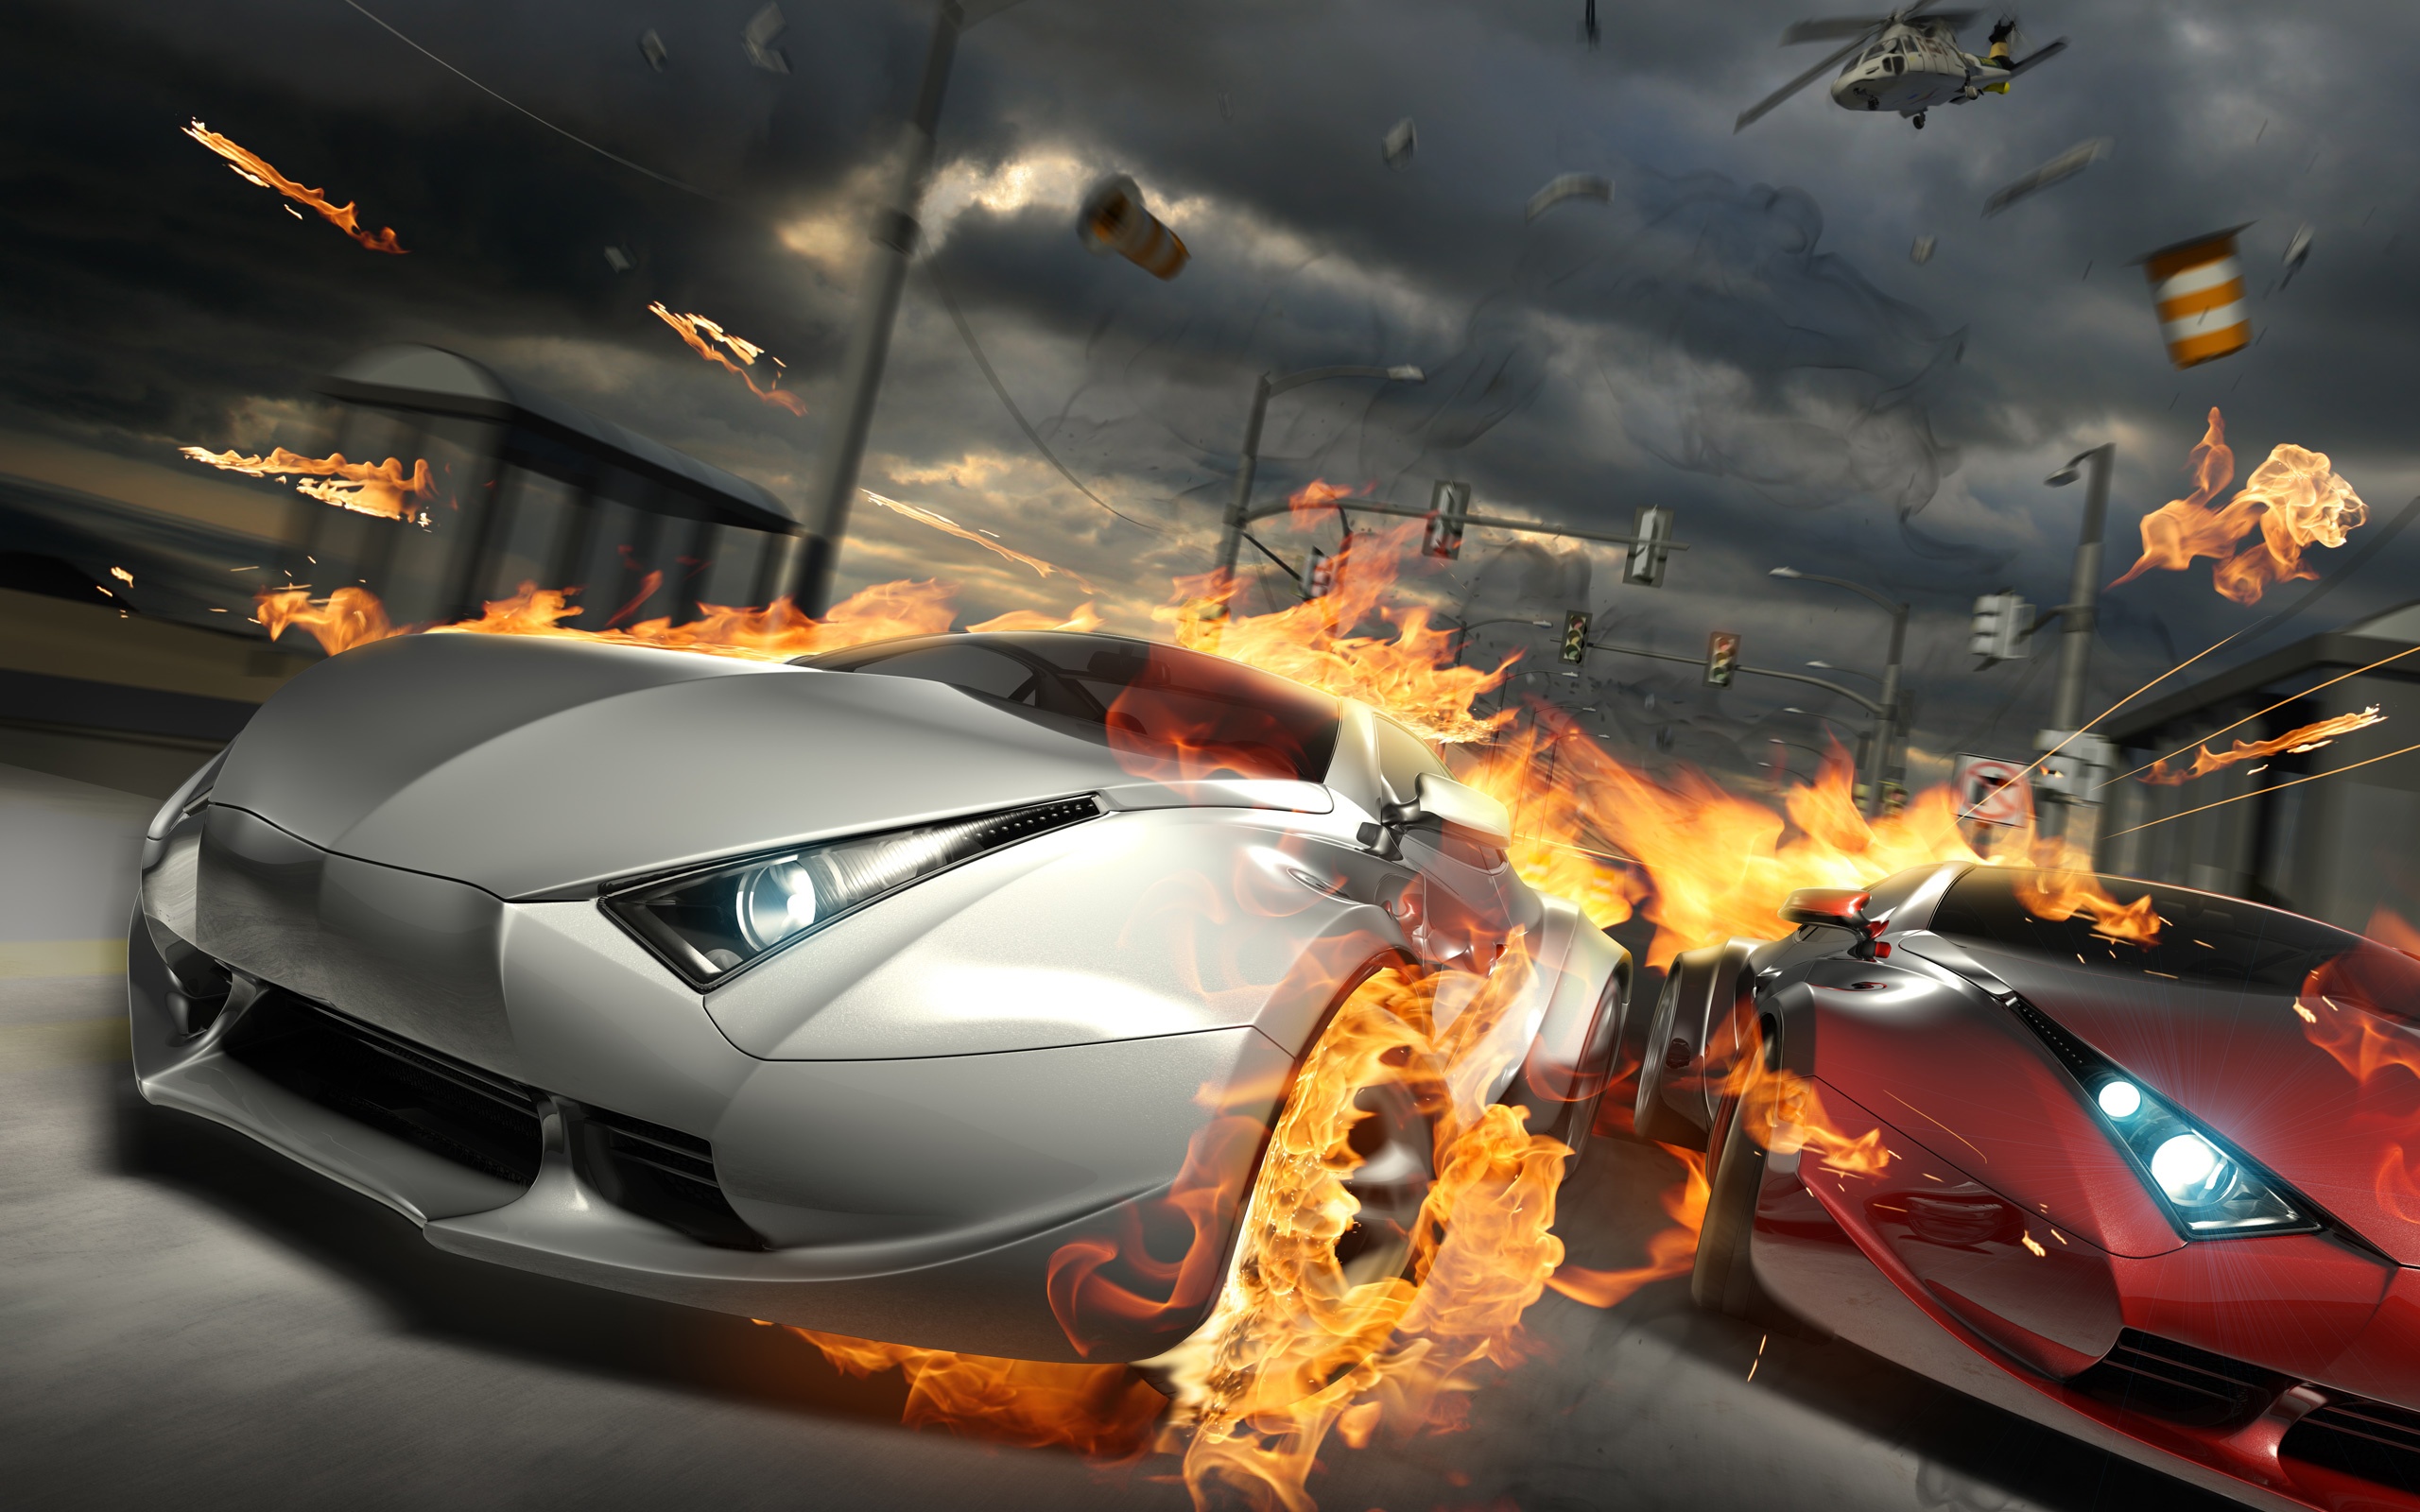 High Speed Fast Car with Fire | Photo and Desktop Wallpaper